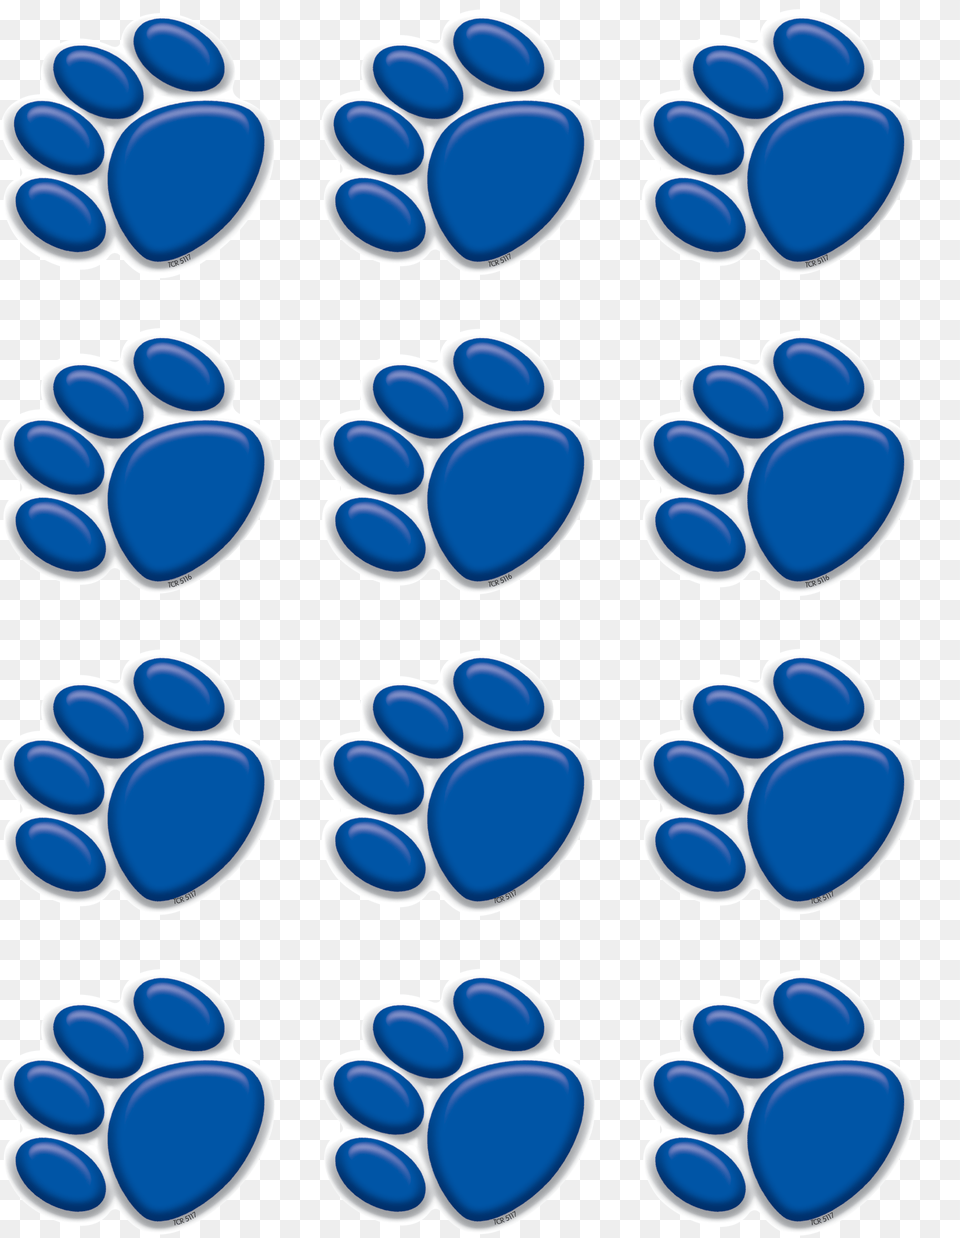 Blue Paw Prints Mini Accents Image Social Infrastructure In India, Footprint Free Png Download